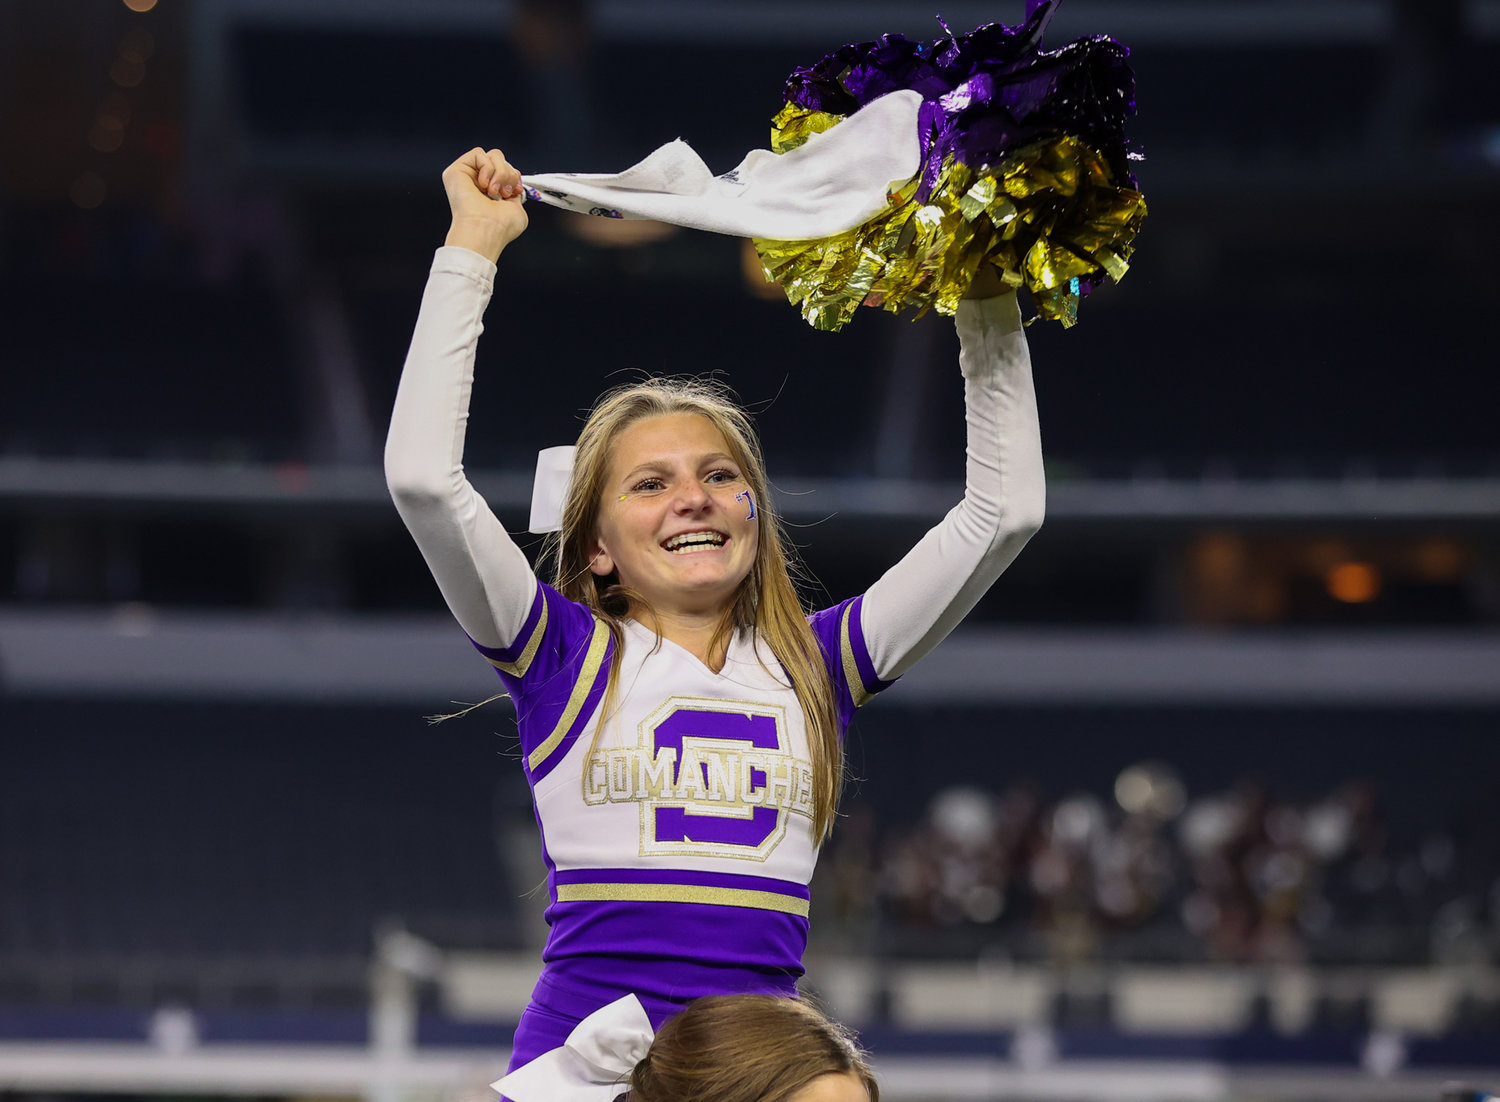 A Shiner Comanches cheerleader during the Class 2A Division I state football championship game between Shiner and Hawley on December 15, 2021 in Arlington, Texas.